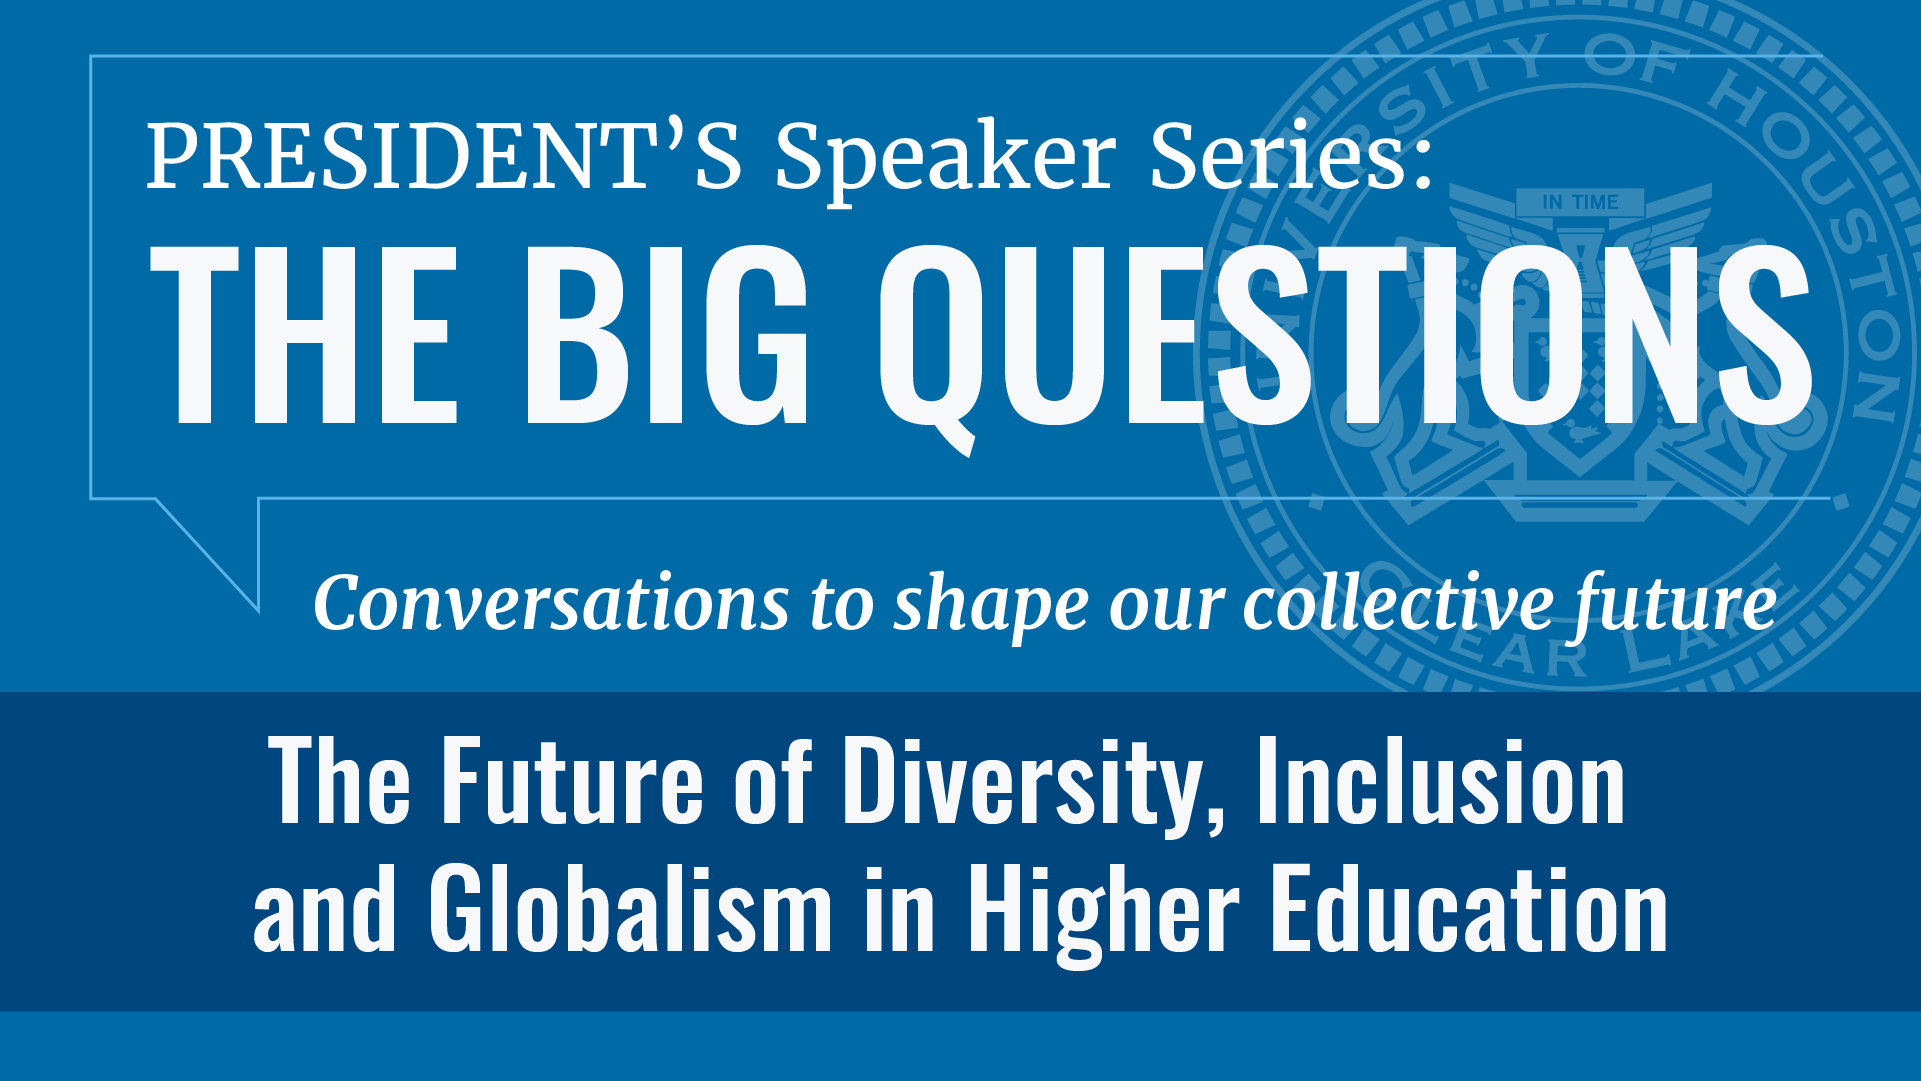 President's Speaker Series: The Big Questions, Conversations to shape our collective future. The Future of Diversity, Inclusion and Globalism in Higher Education.